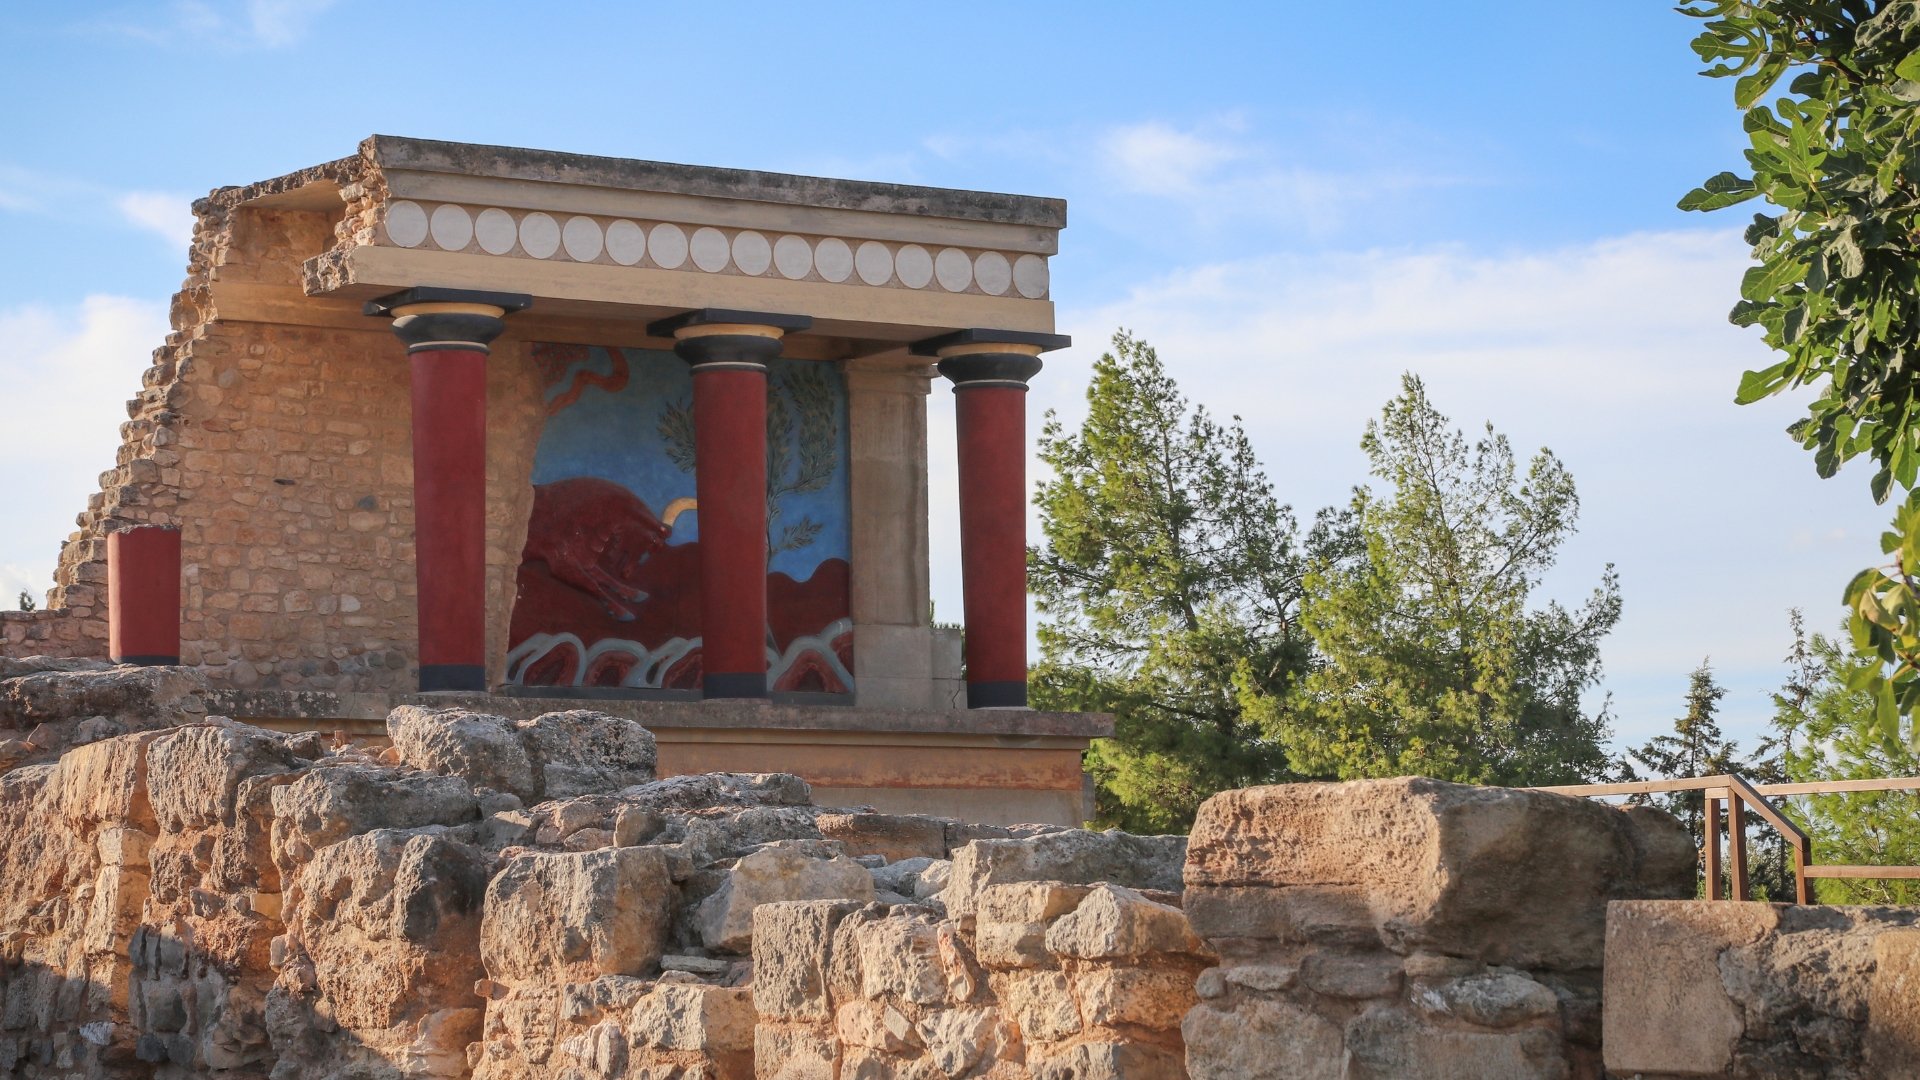 Excursion at Knossos Place at Heraklion Crete